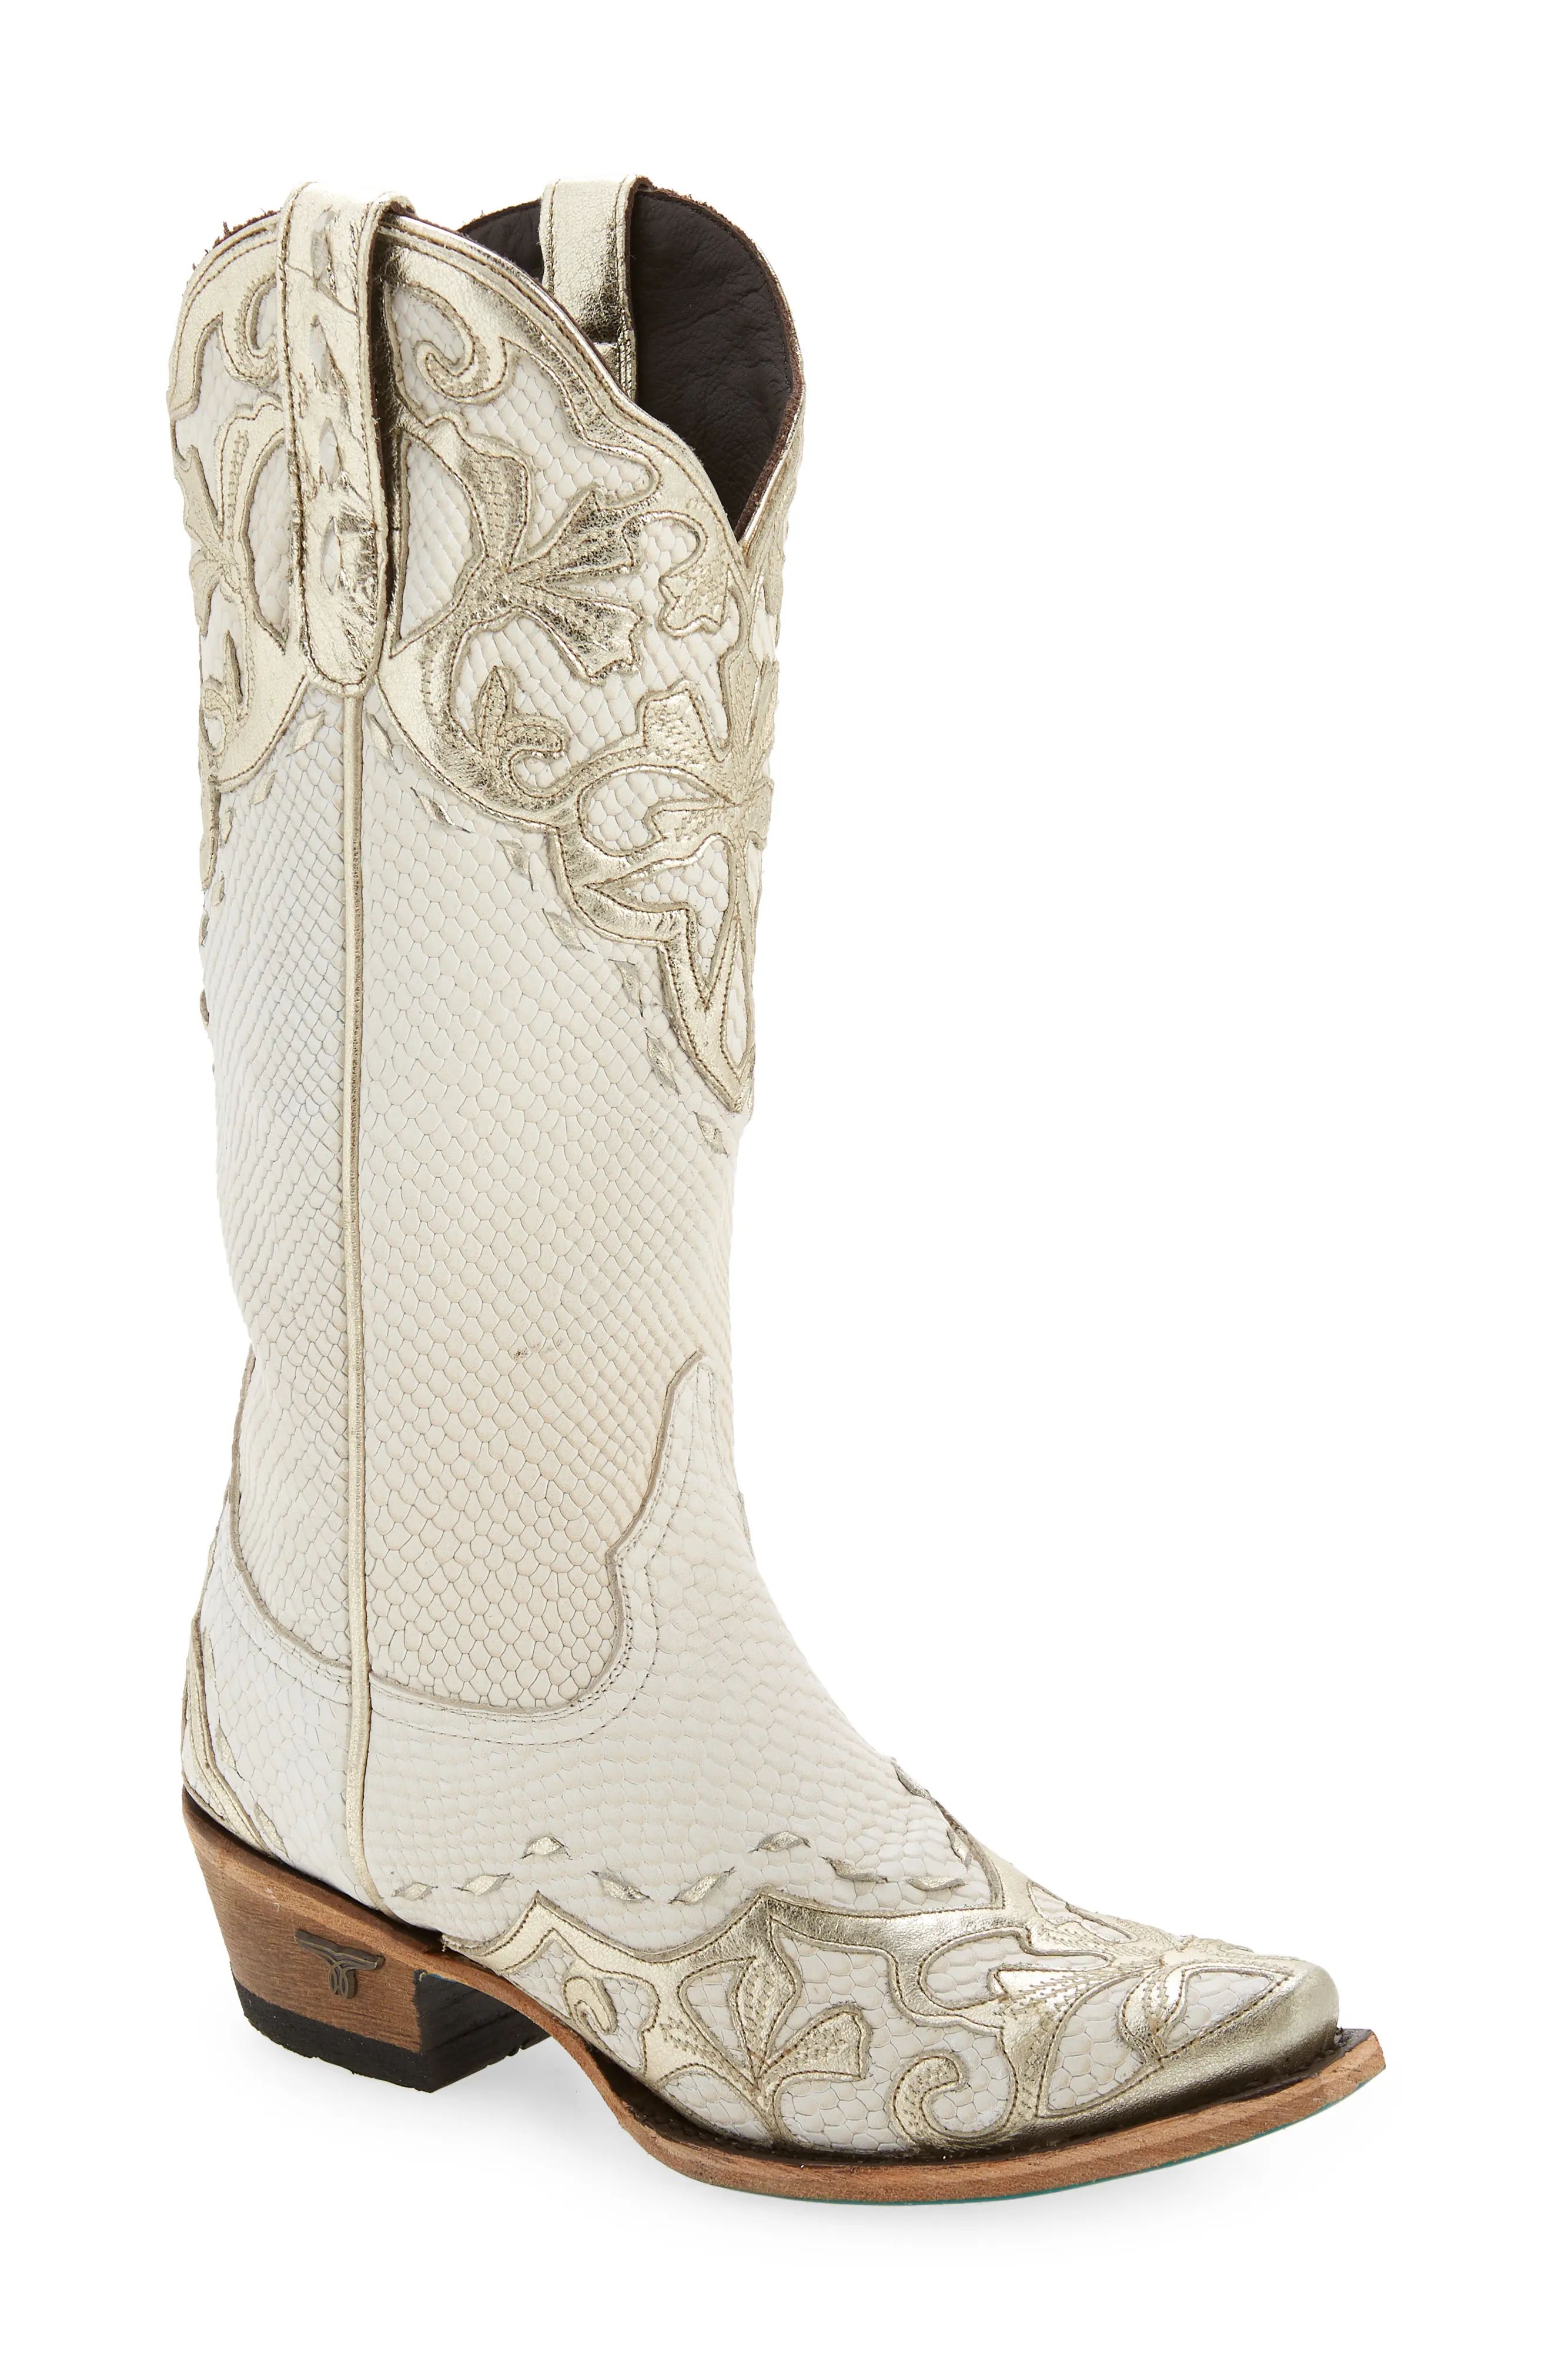 Lane Boots Lily Western Boot in Cream/Champagne Metallic at Nordstrom, Size 6 | Nordstrom